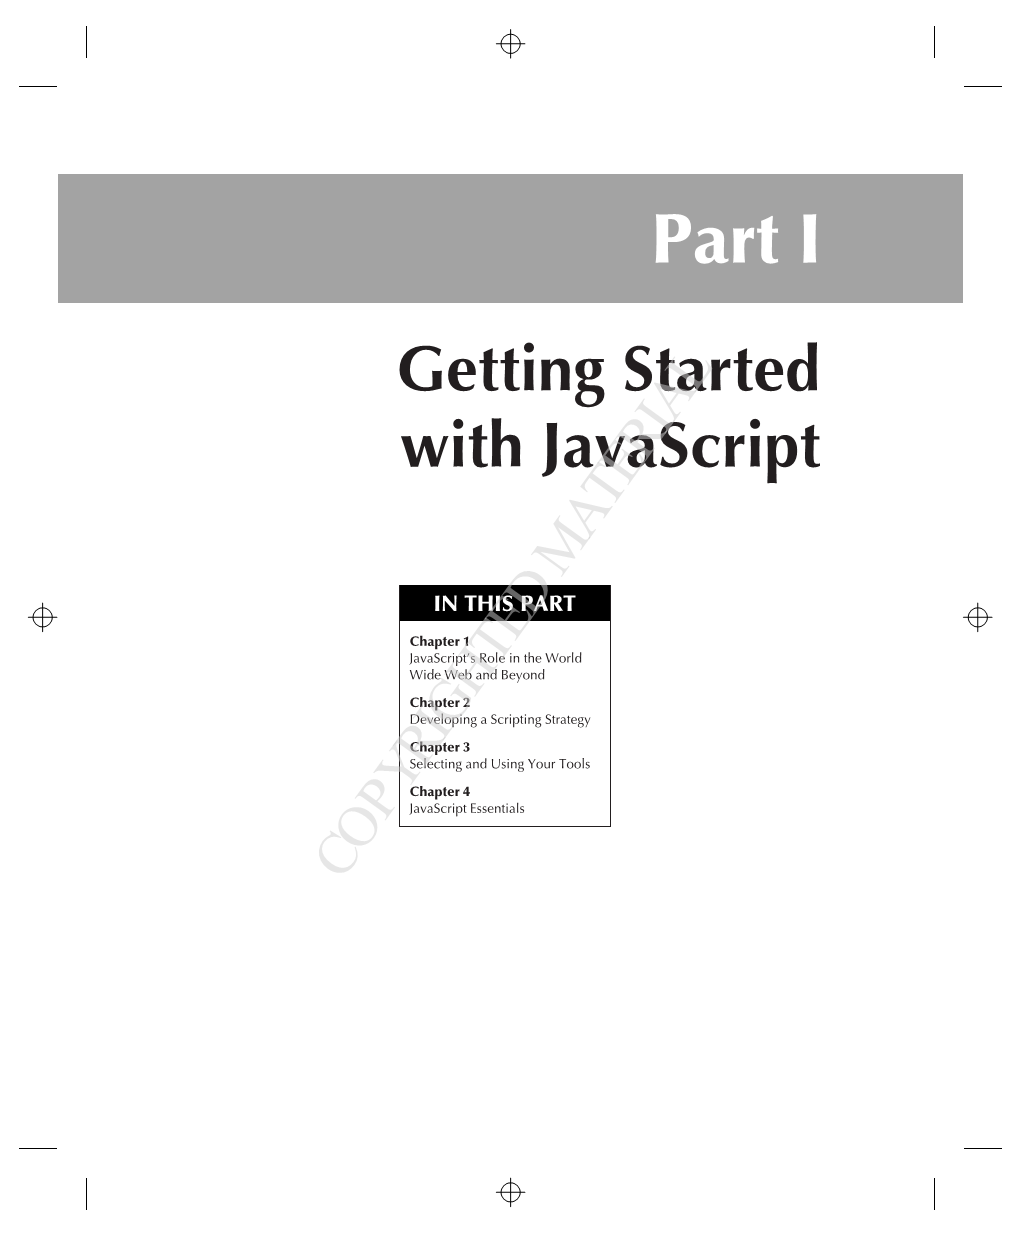 Part I Getting Started with Javascript